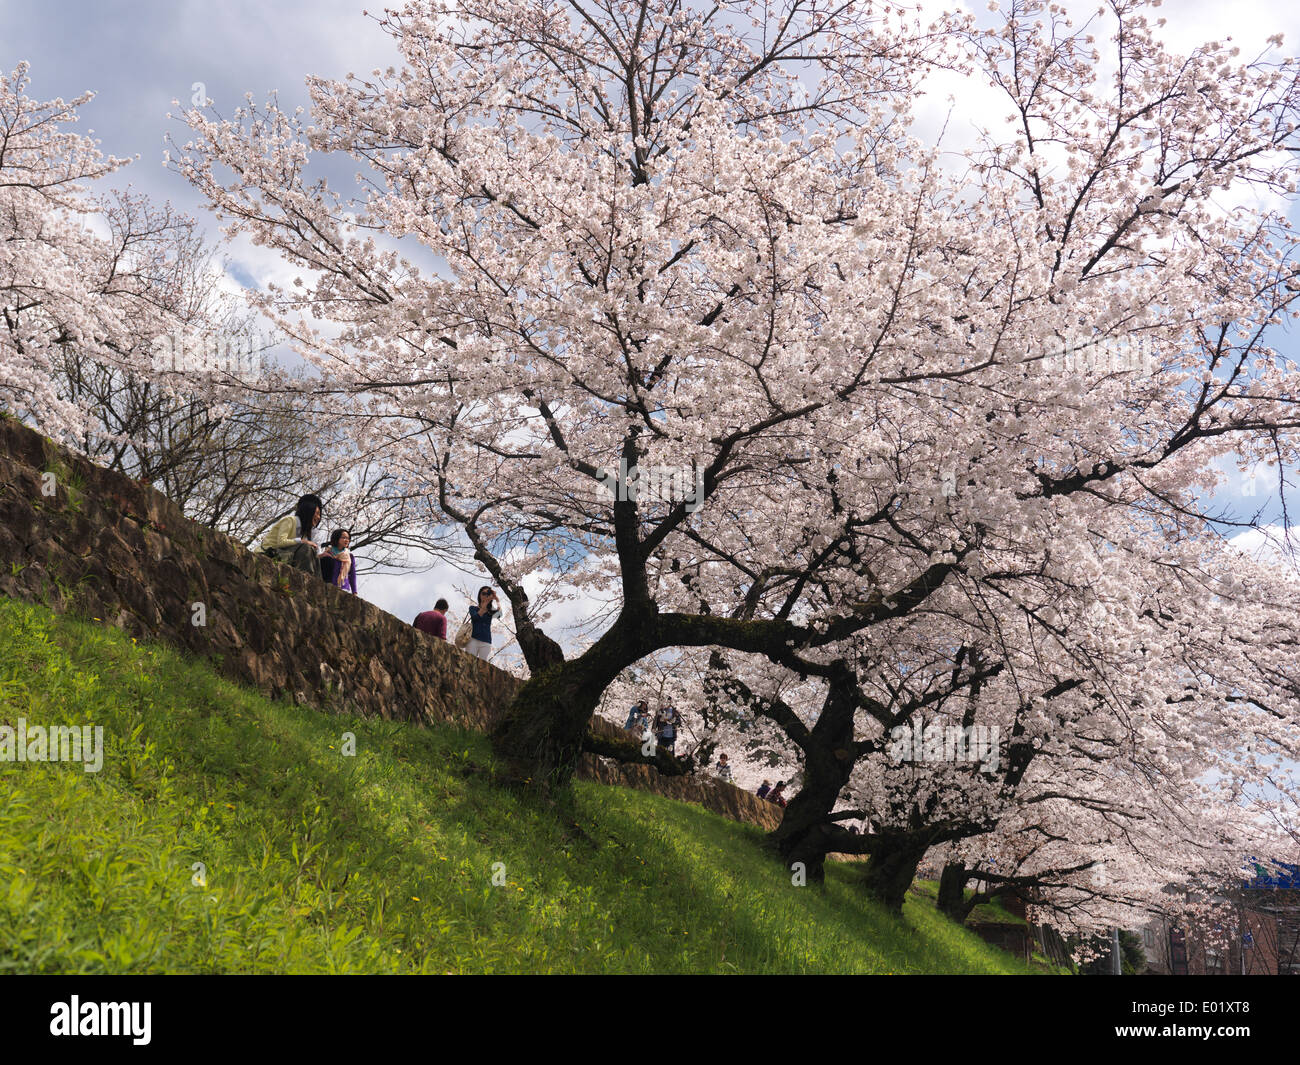 People enjoying sight of blossoming cherry tree in Kyoto, Japan Stock Photo